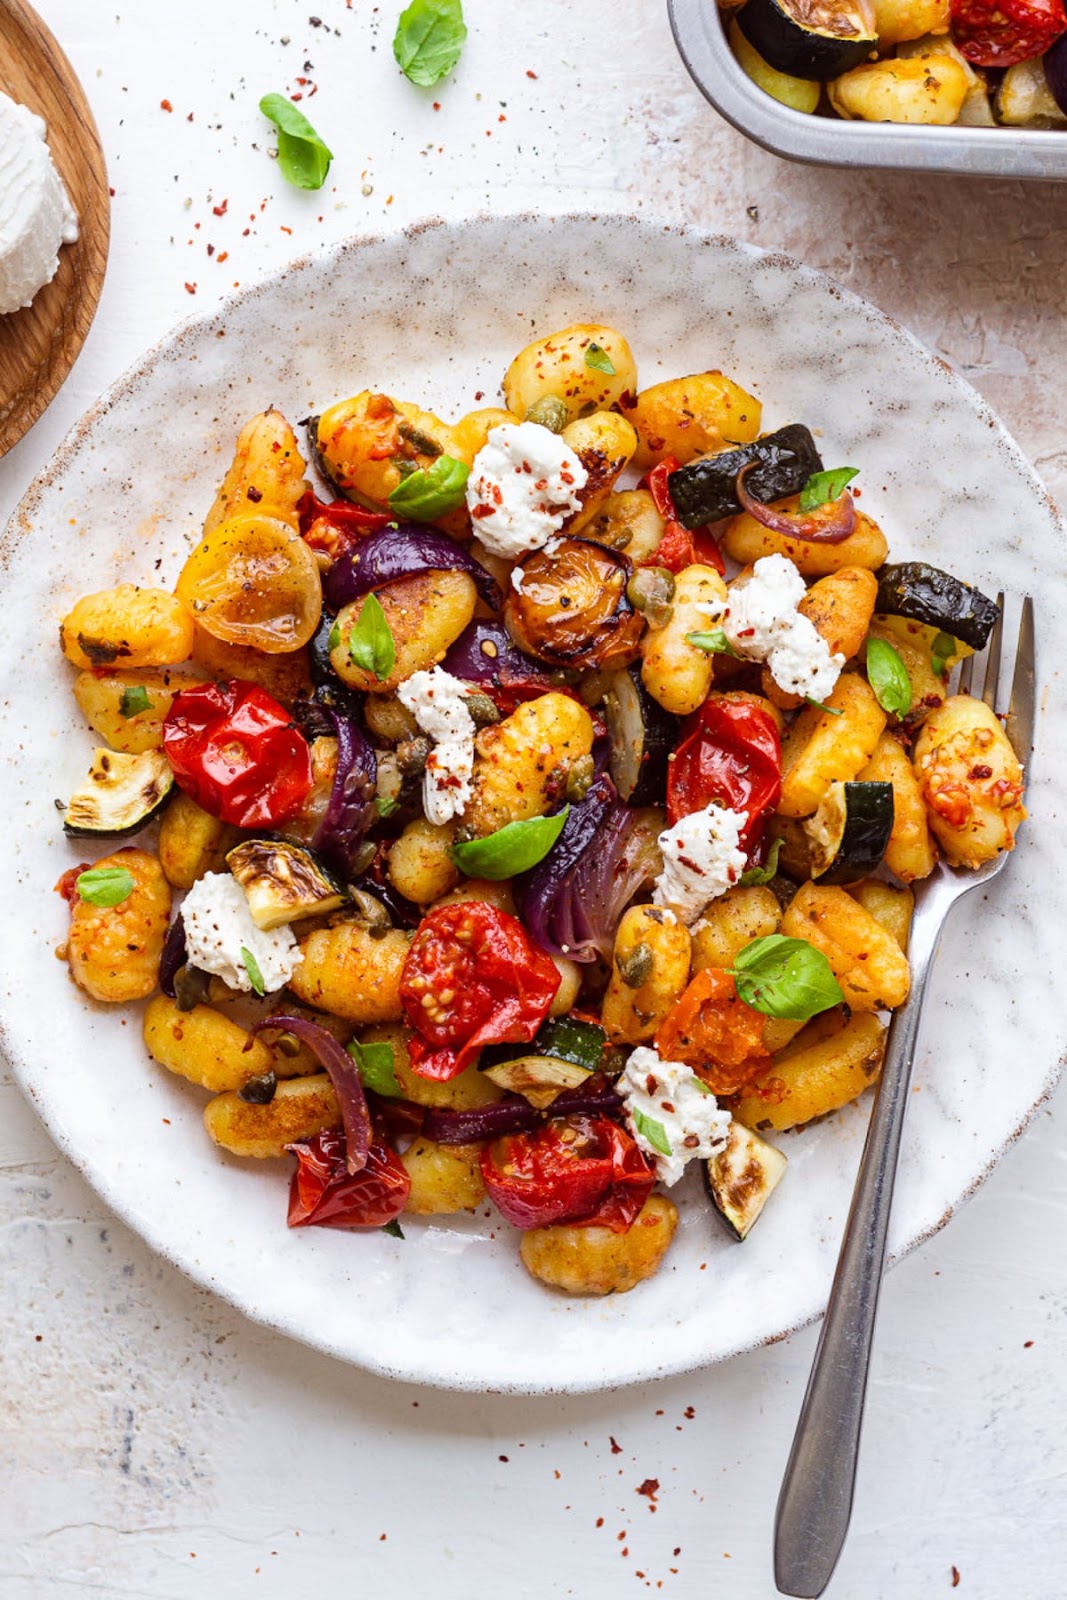 Top 5 Healthy Gnocchi Recipes: Nutritious for Every Meal